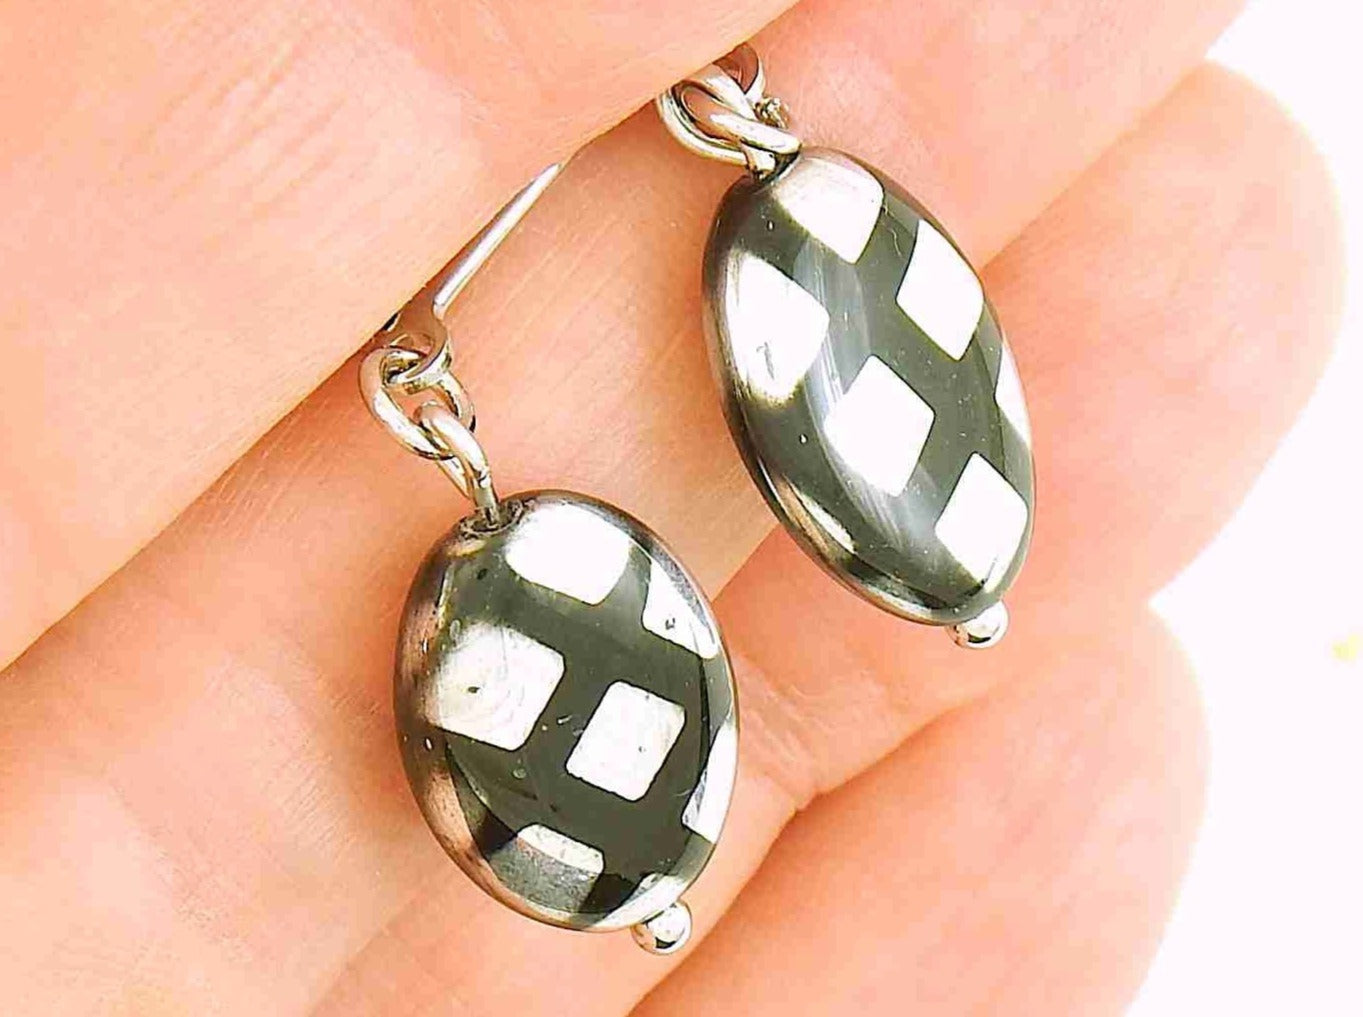 Short earrings with shiny black Czech glass ovals, choice of 2 patterns (multicoloured dots, silver criss-cross), stainless steel lever back hooks